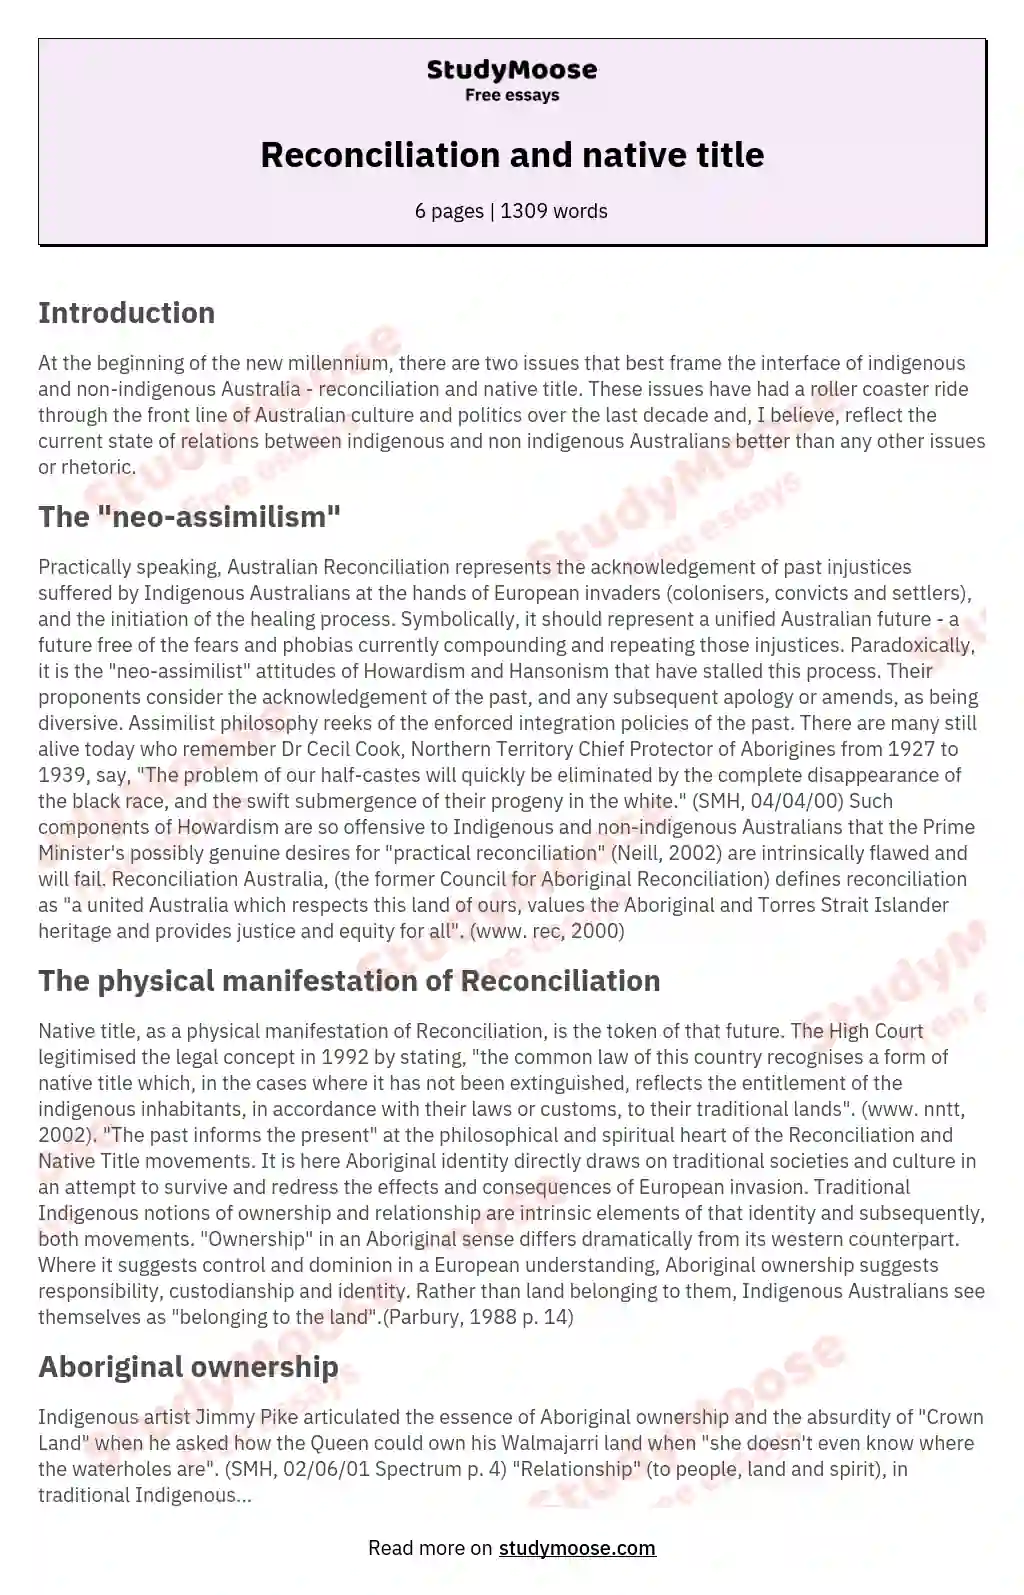 Reconciliation and native title essay